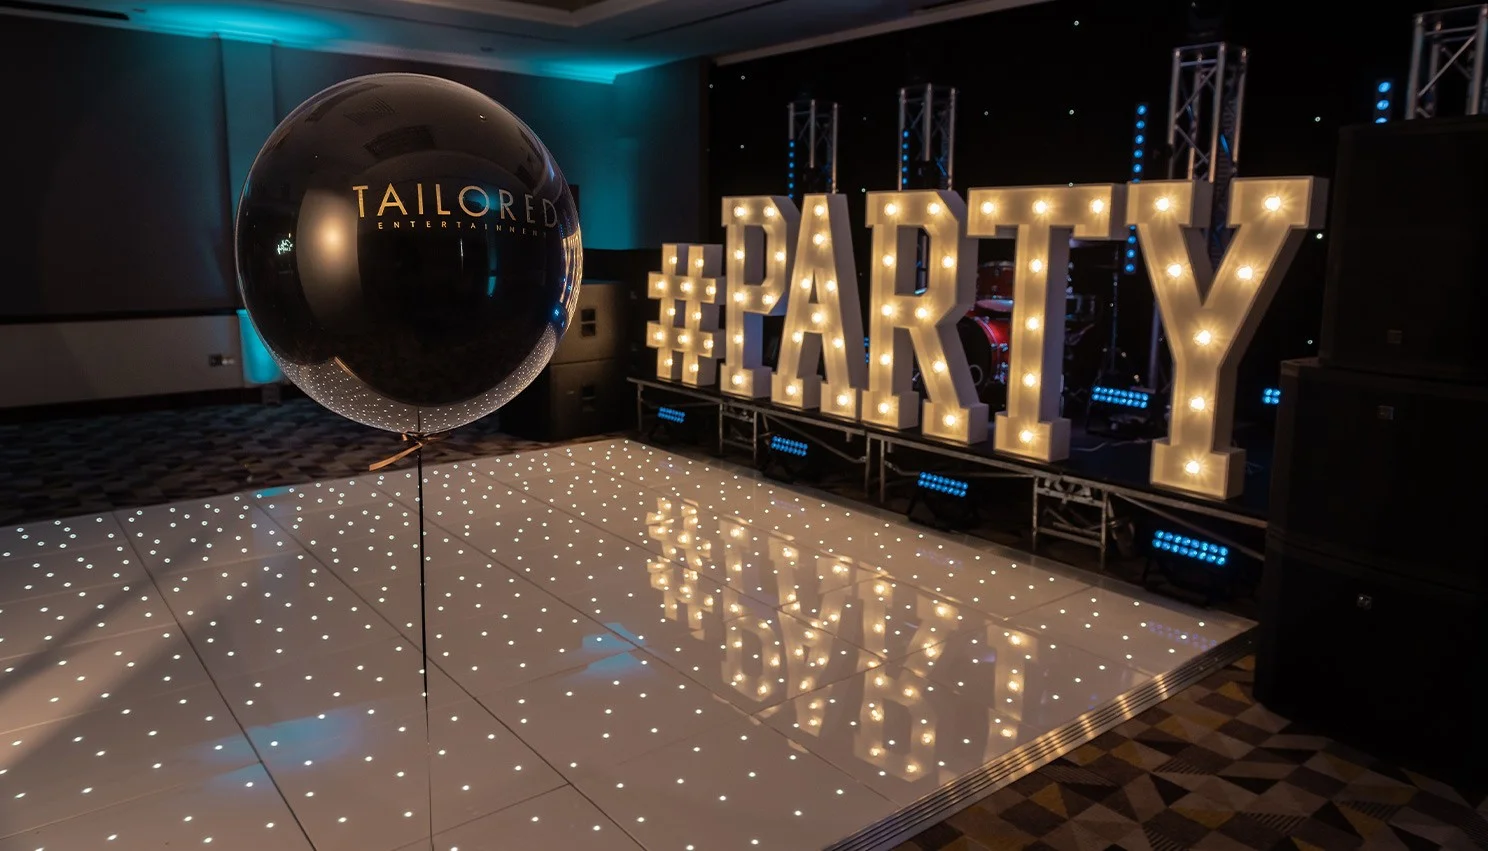 The Corporate Awards Decor Package